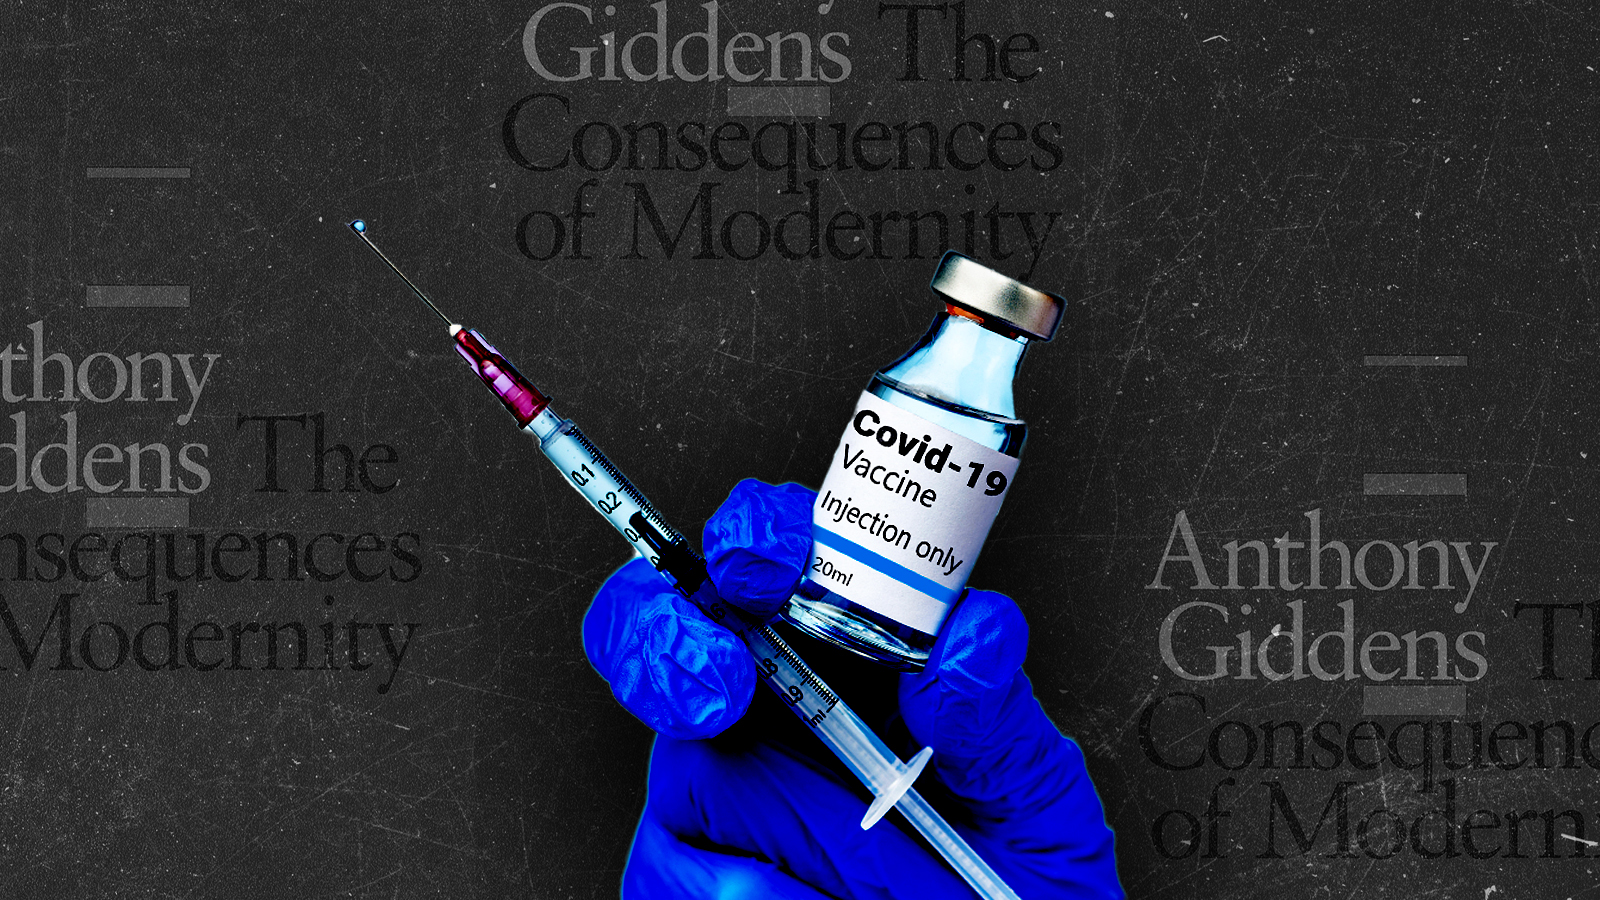 The Consequences of Modernity and a vaccine.